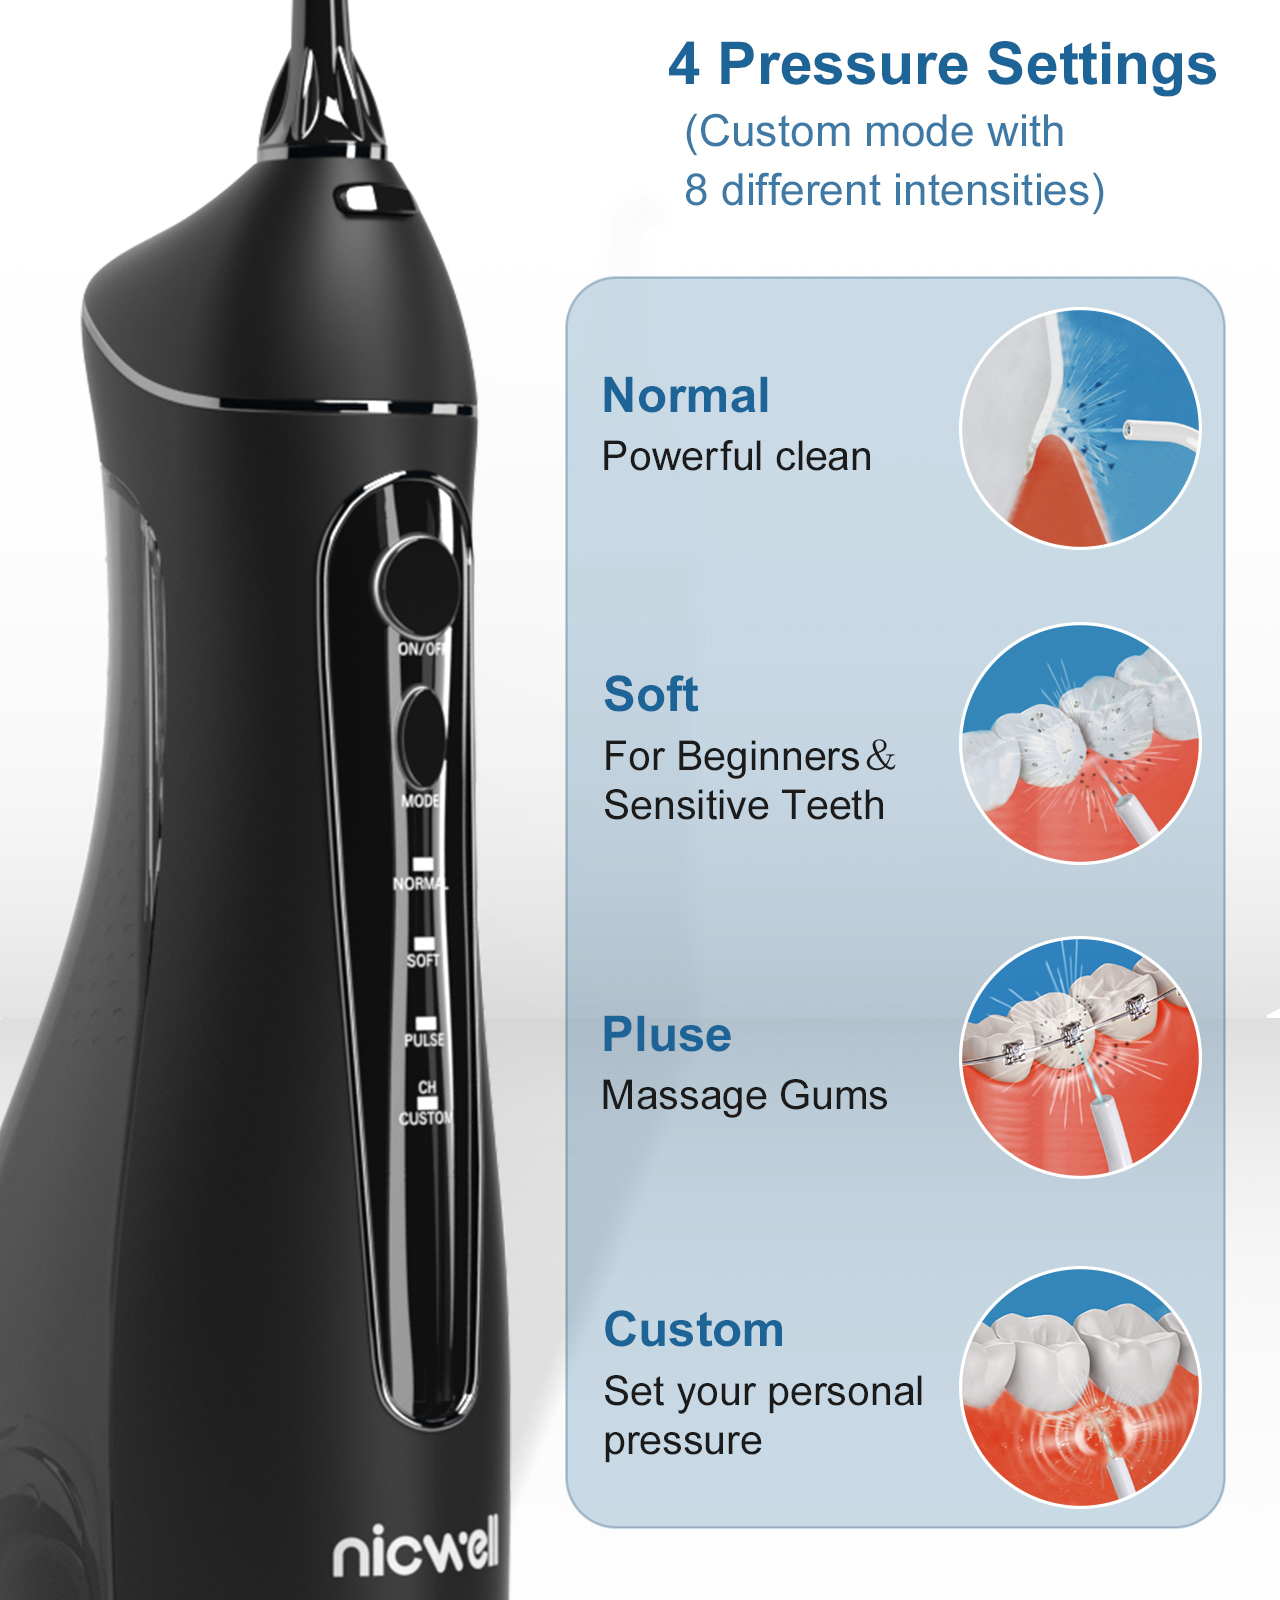 Water Dental Flosser Cordless for Teeth - Nicwell 4 Modes Dental Oral Irrigator, Portable and Rechargeable IPX7 Waterproof Powerful Battery Life Water Teeth Cleaner Picks for Home Travel Black - image 5 of 6